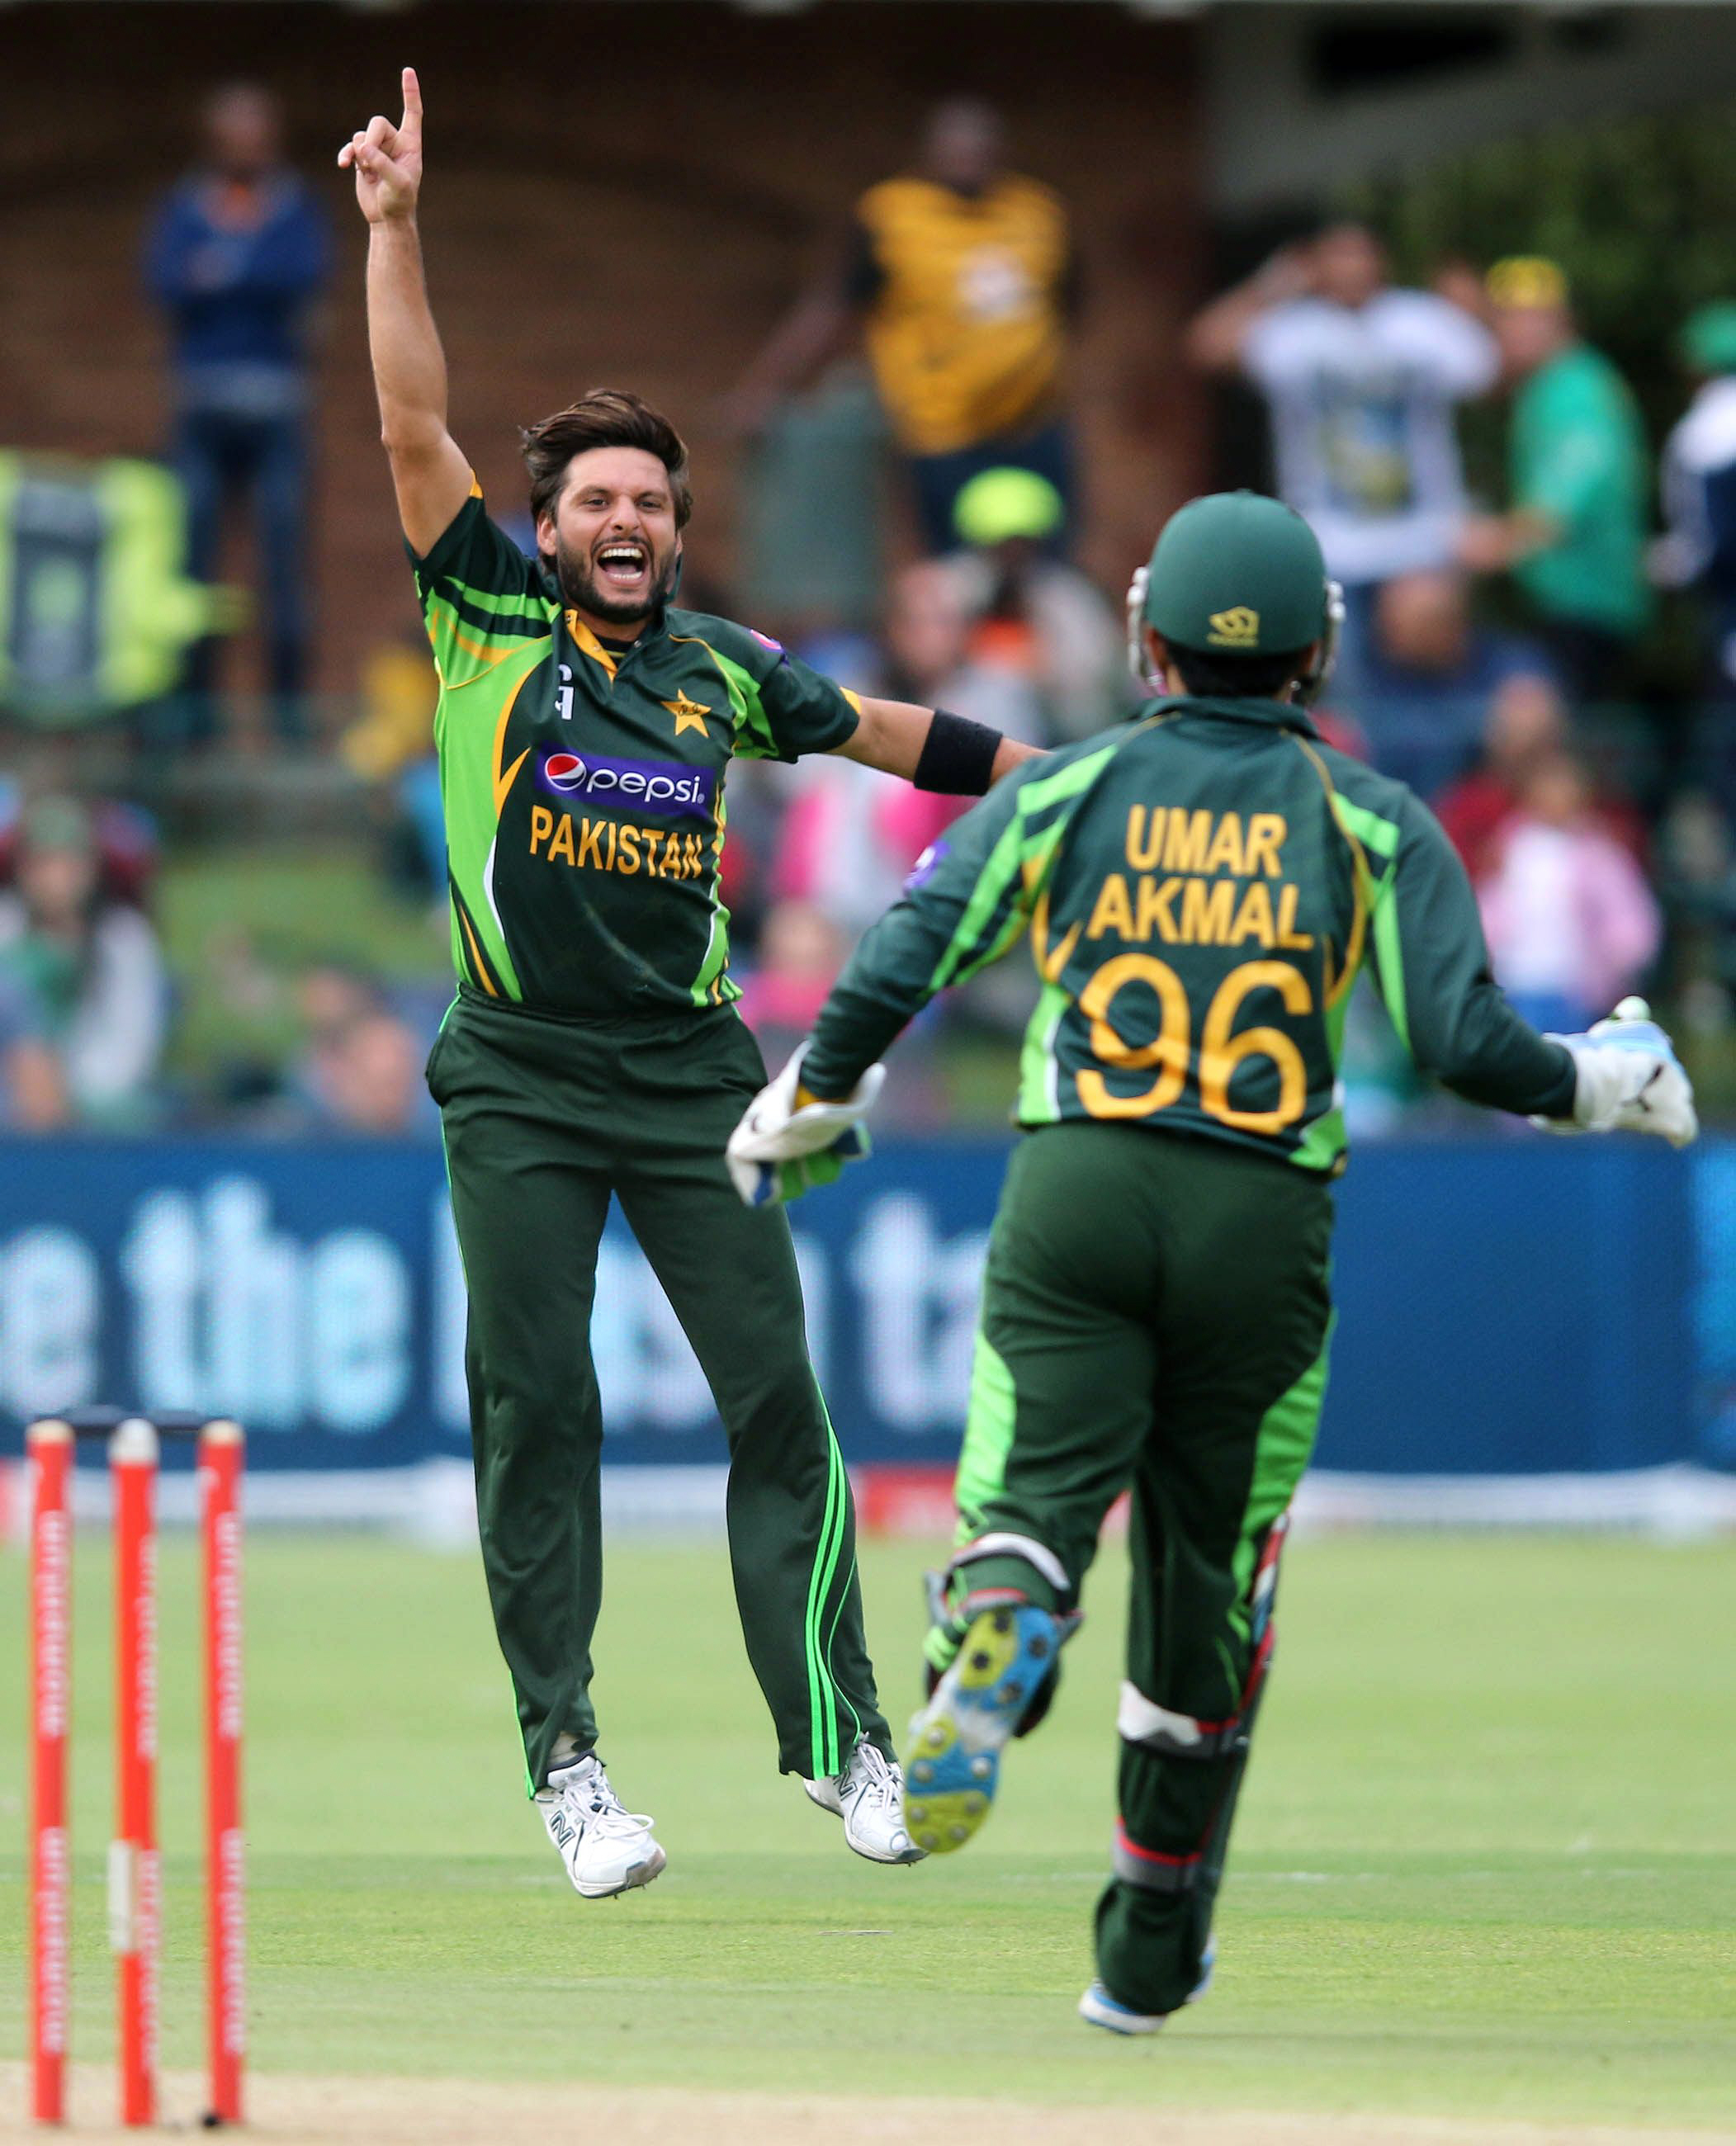 pakistan 039 s shahid afridi l celebrates the wicket of south africa 039 s quinton de kock during the second one day international odi cricket match between pakistan and south africa at the st georges cricket ground in port elizabeth on november 27 2013 photo afp